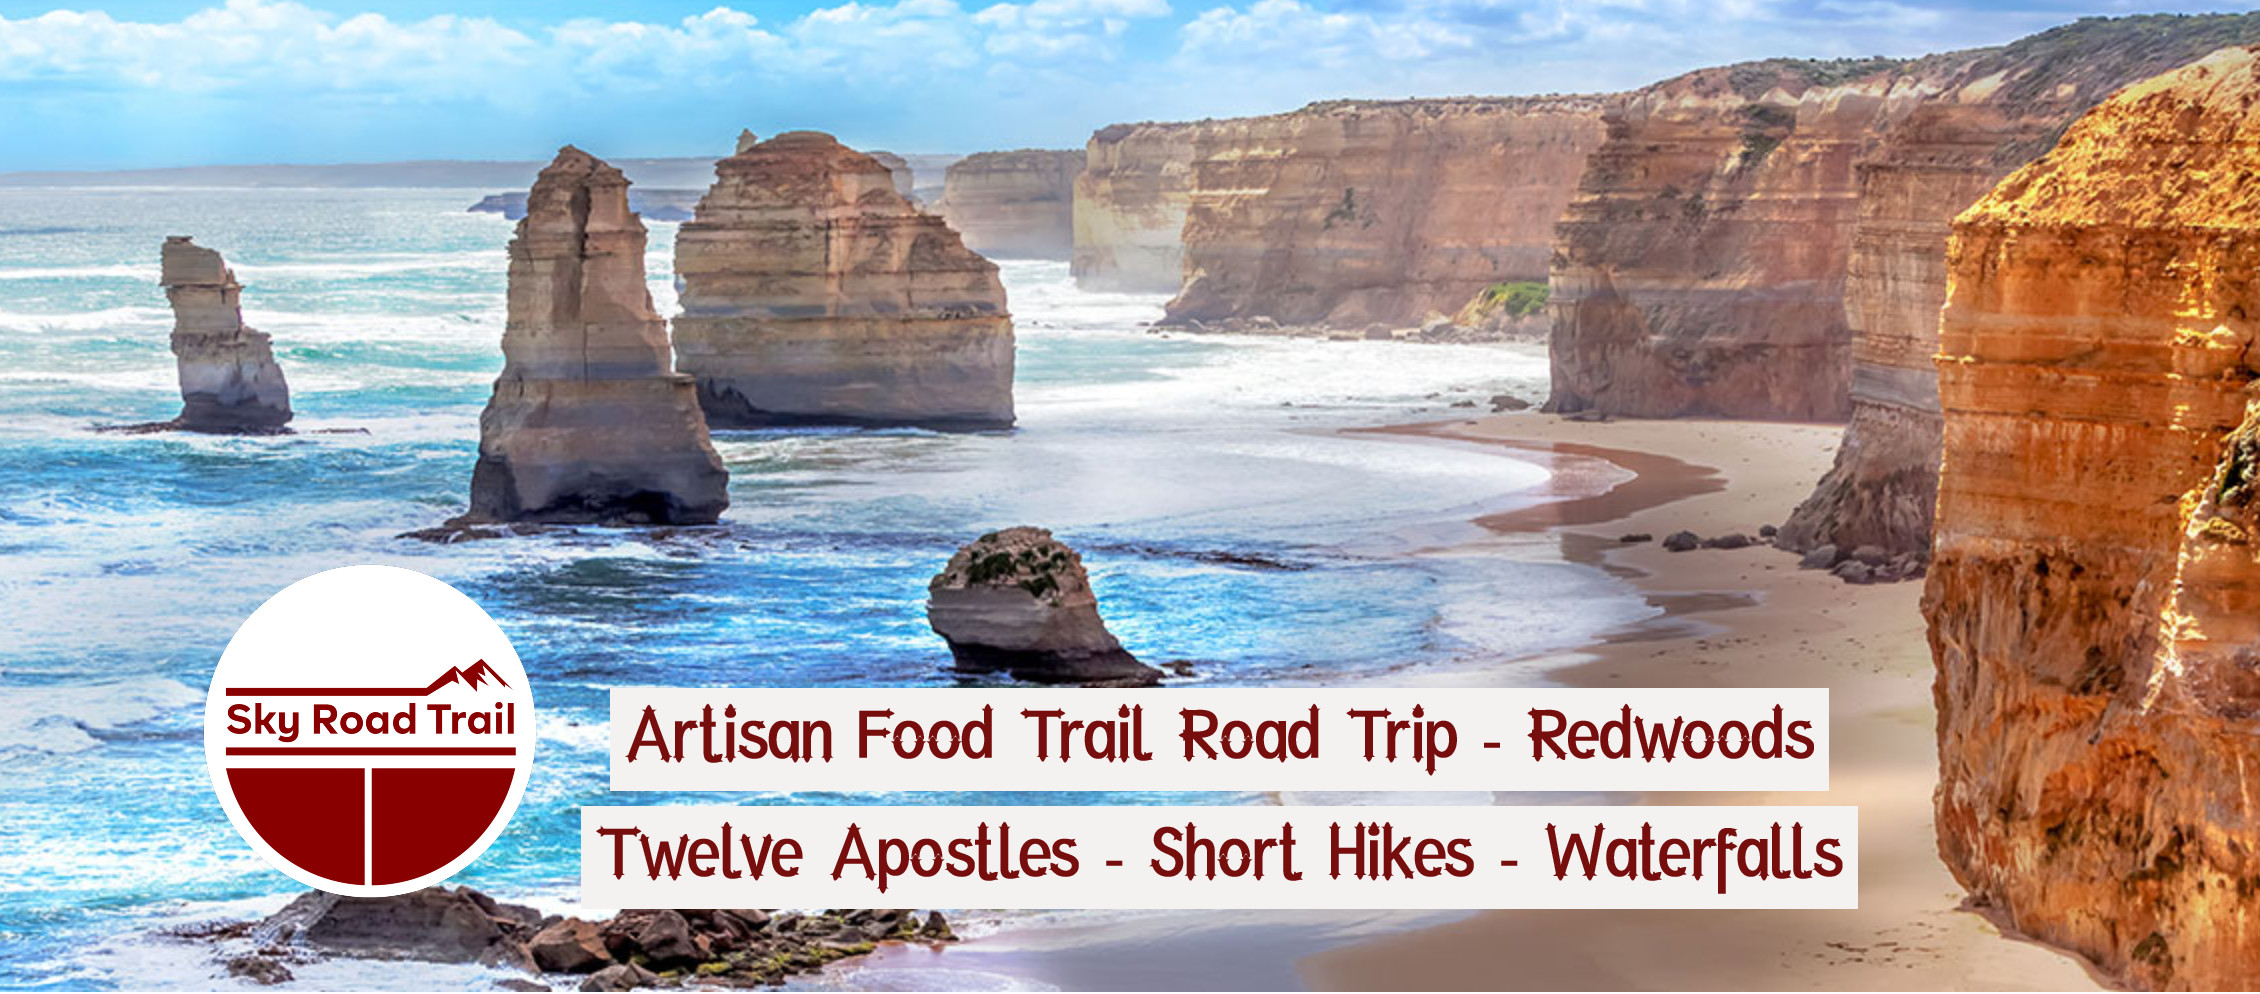 GREAT OCEAN ROAD – SIGHTSEEING AND ARTISAN FOOD TRAIL